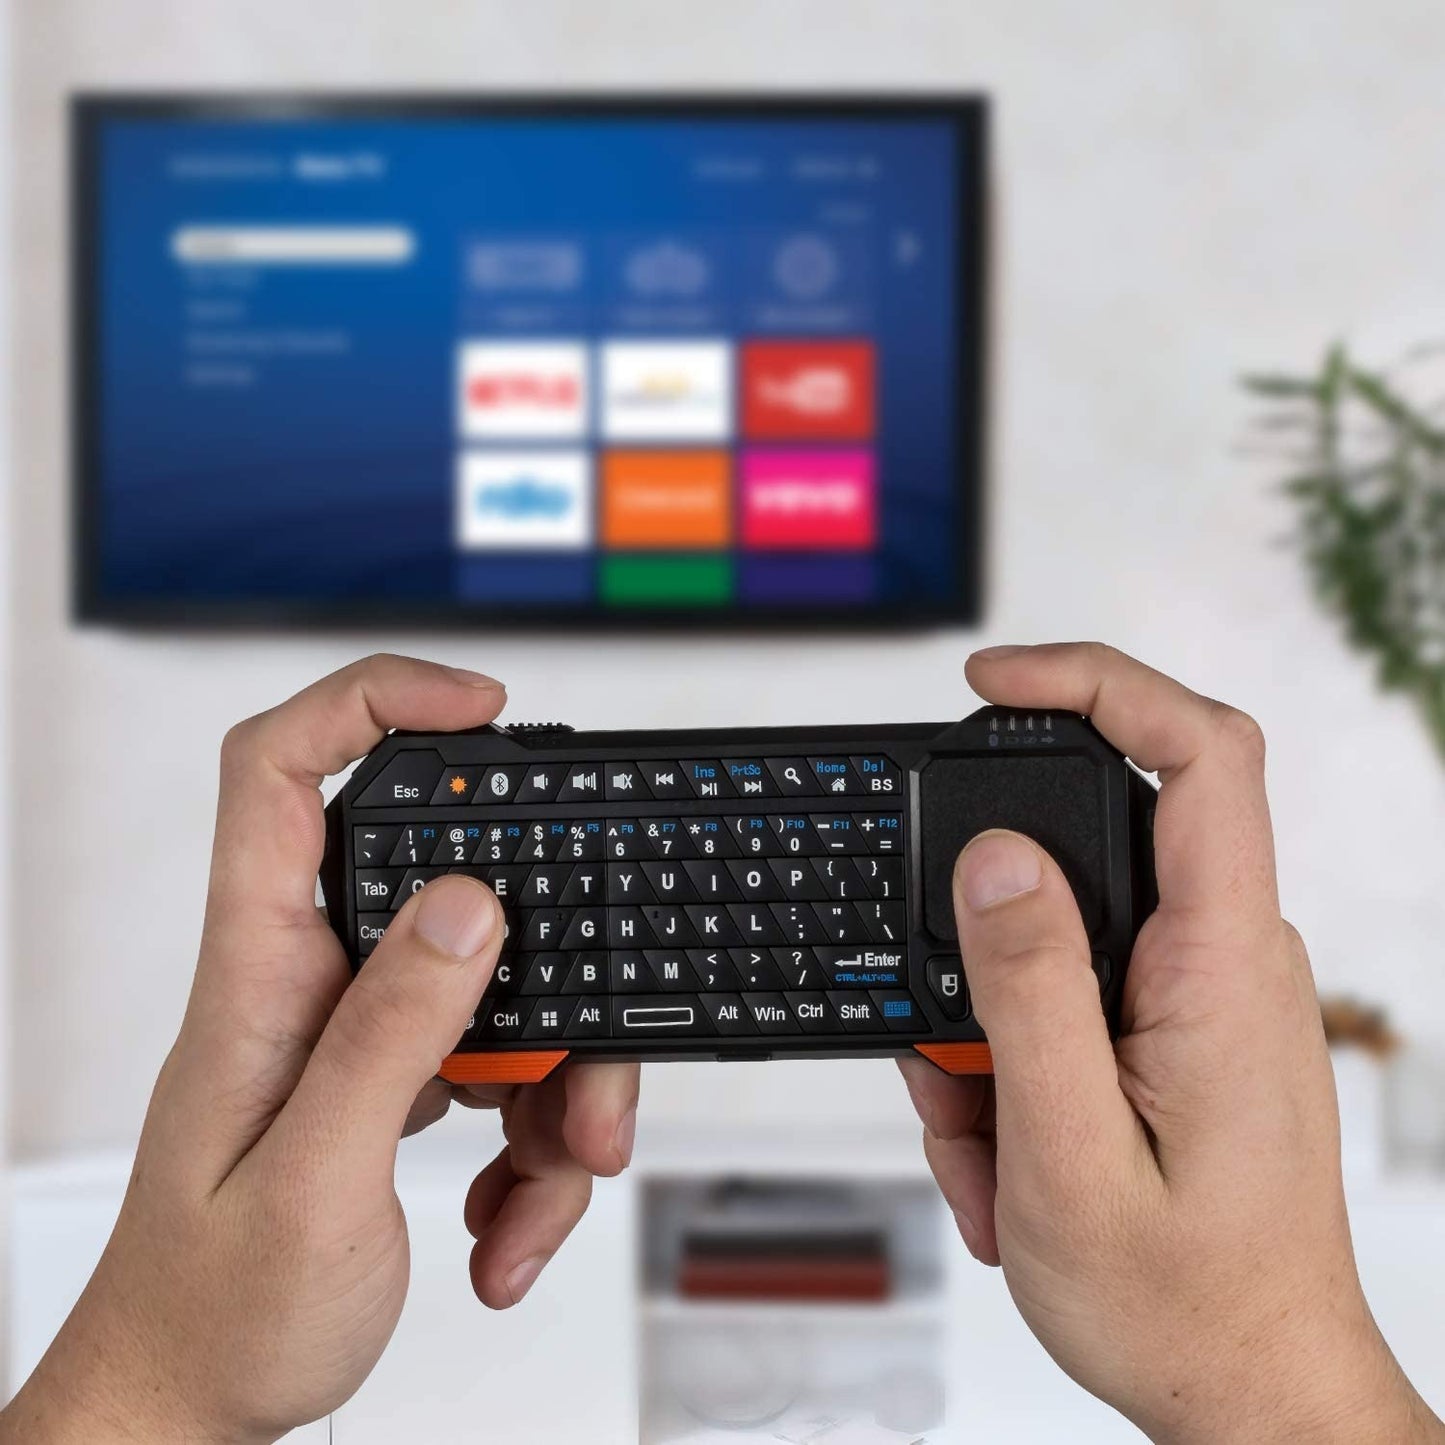 A pair of hands are holding a black colored mini Bluetooth keyboard with touchpad in front of a TV.